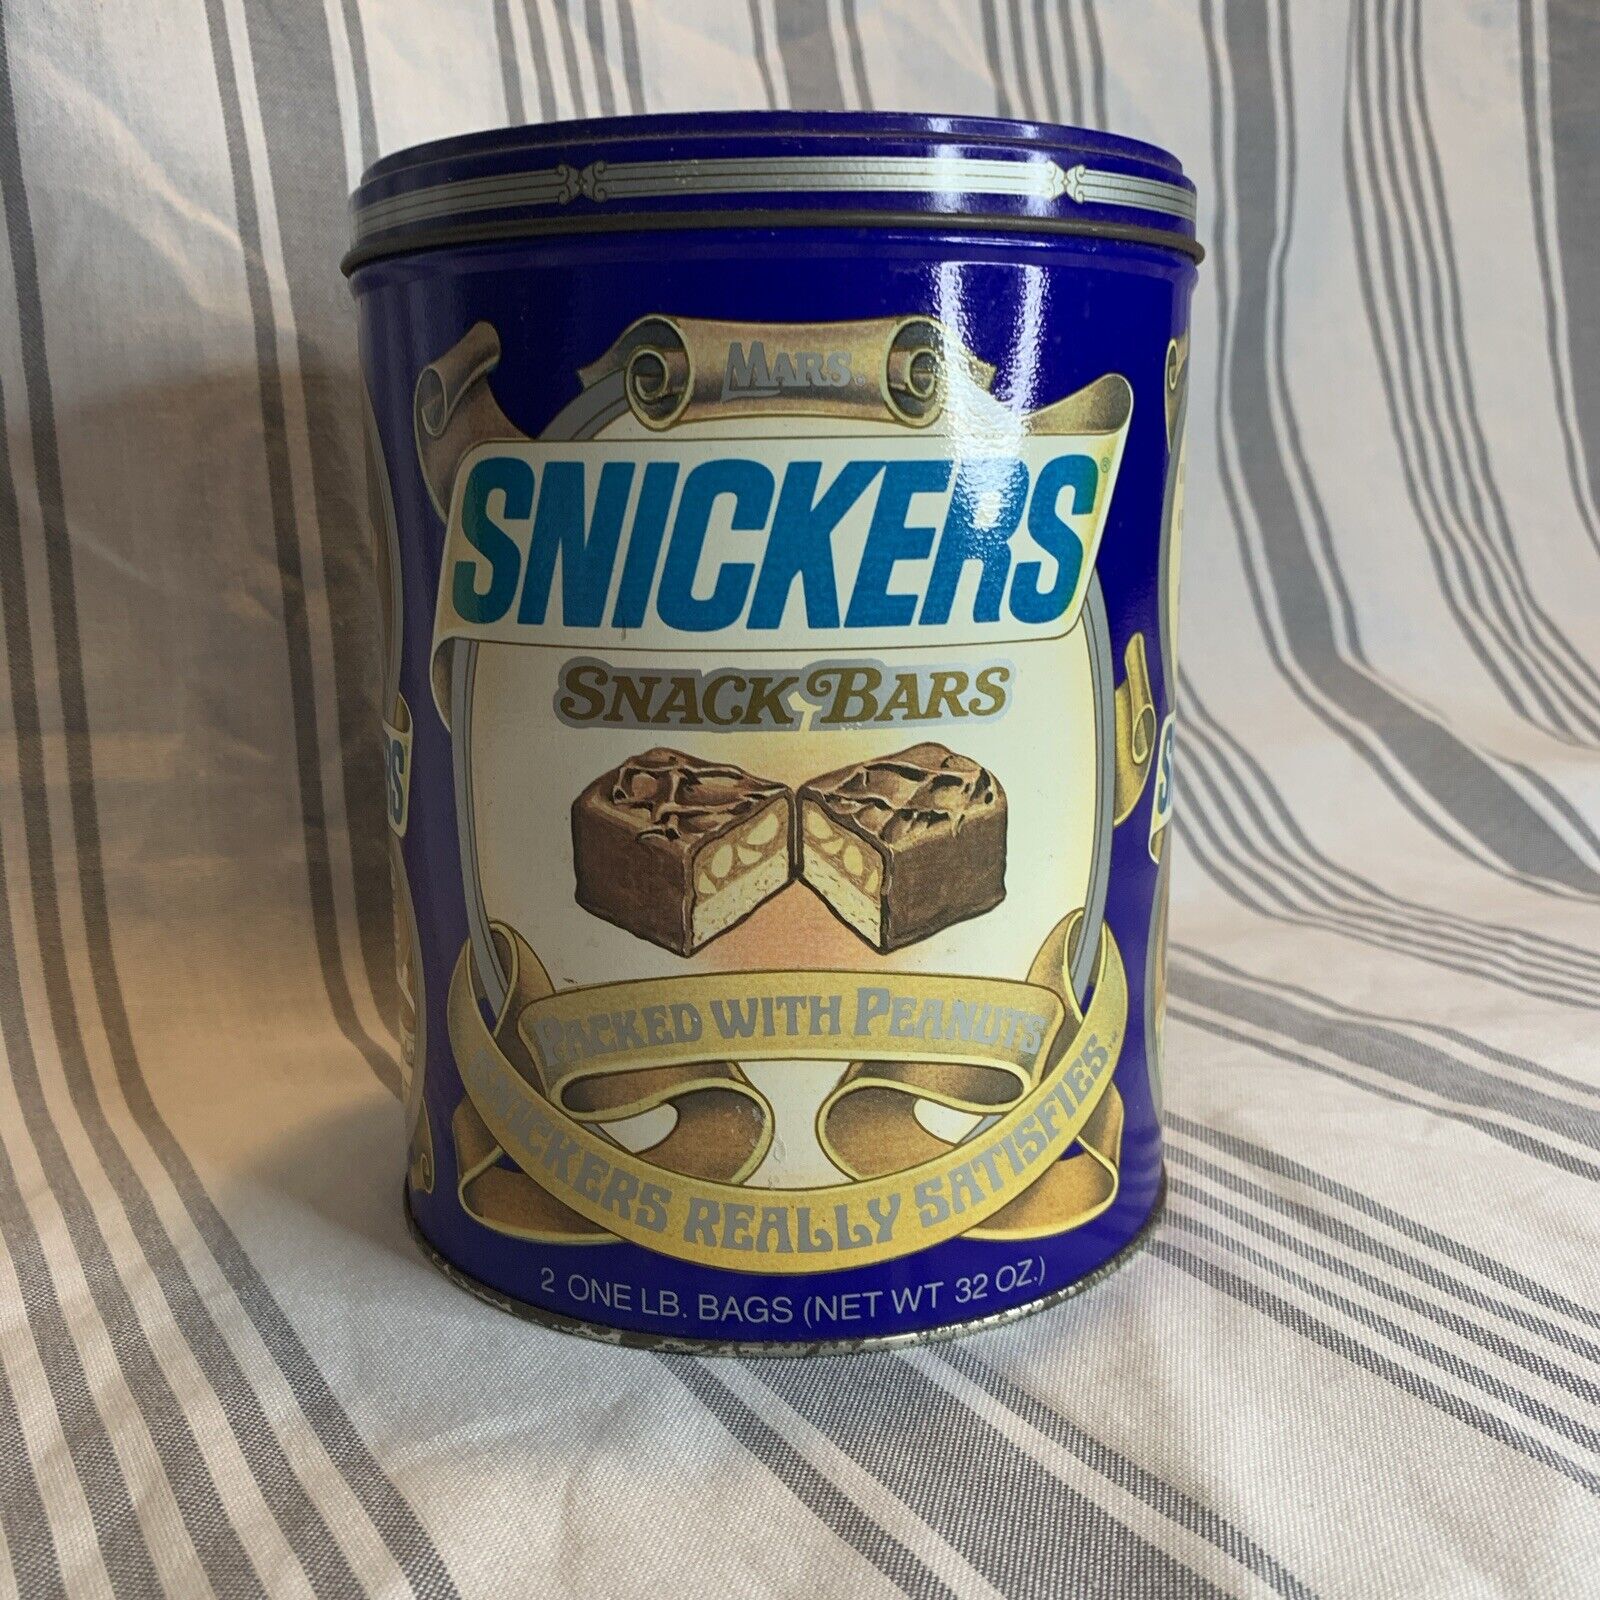 VINTAGE 1985 MARS EMPTY SNICKERS SNACK BARS TIN COLLECTIBLE CANISTER